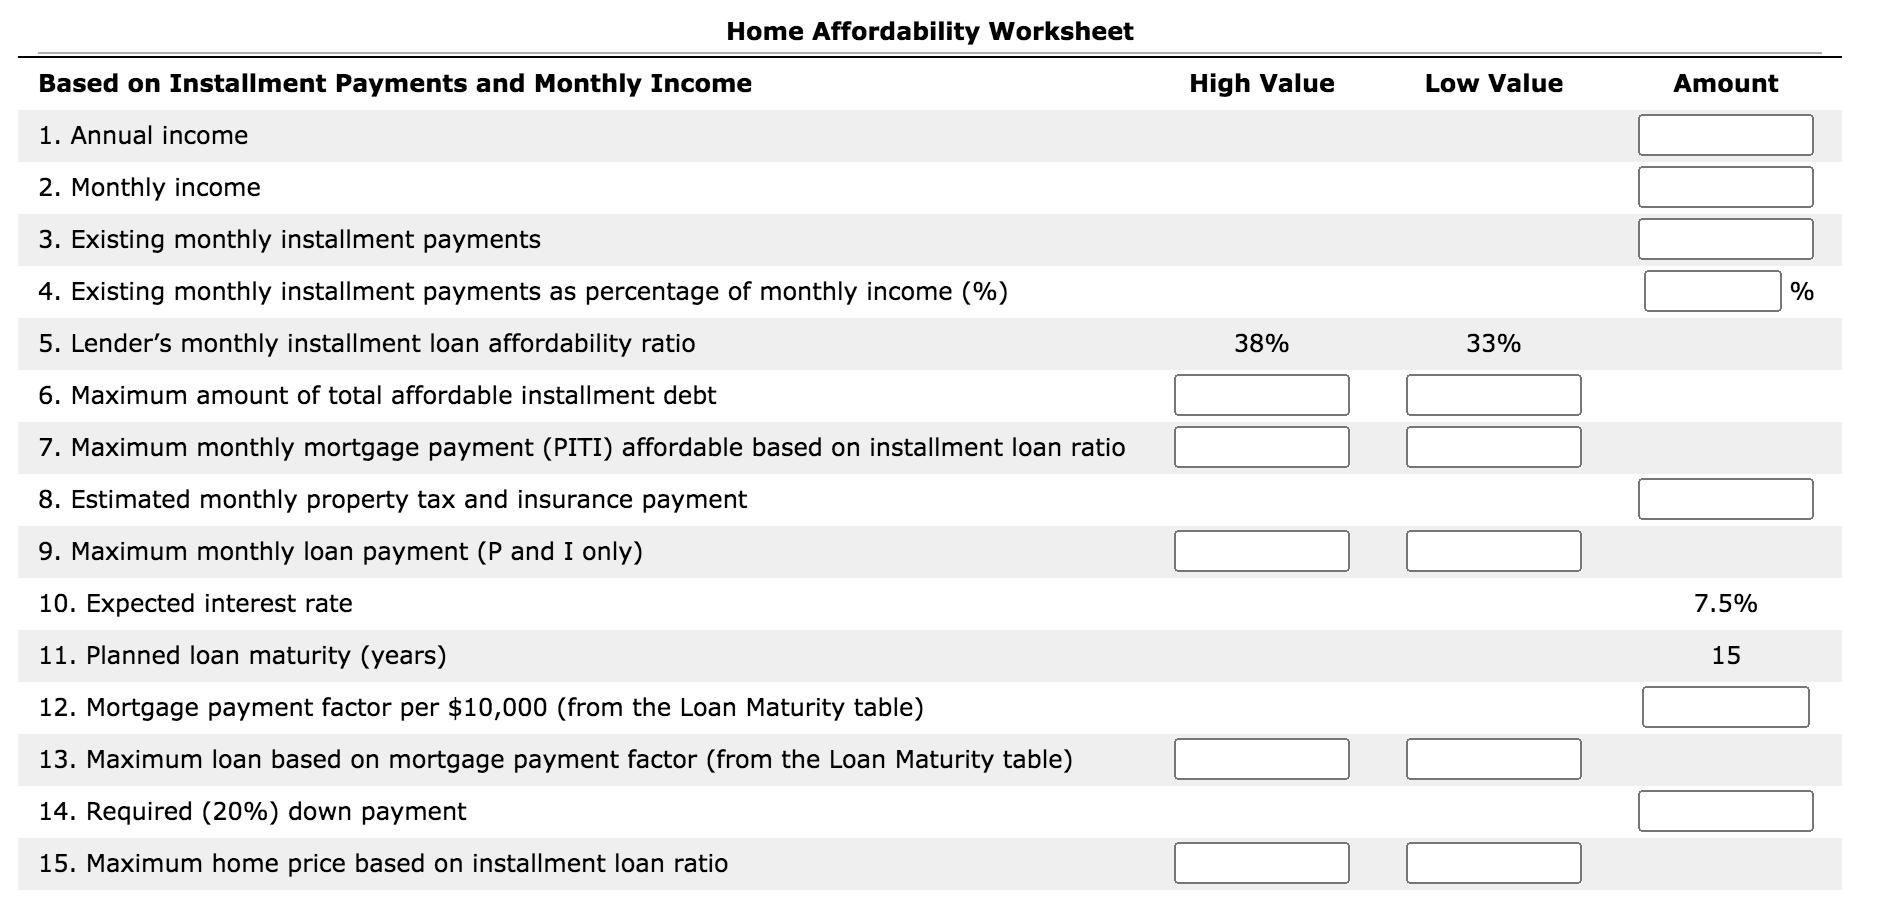 Home Affordability Worksheet Based on Installment Payments and Monthly Income High Value Low Value Amount 1. Annual income 2.